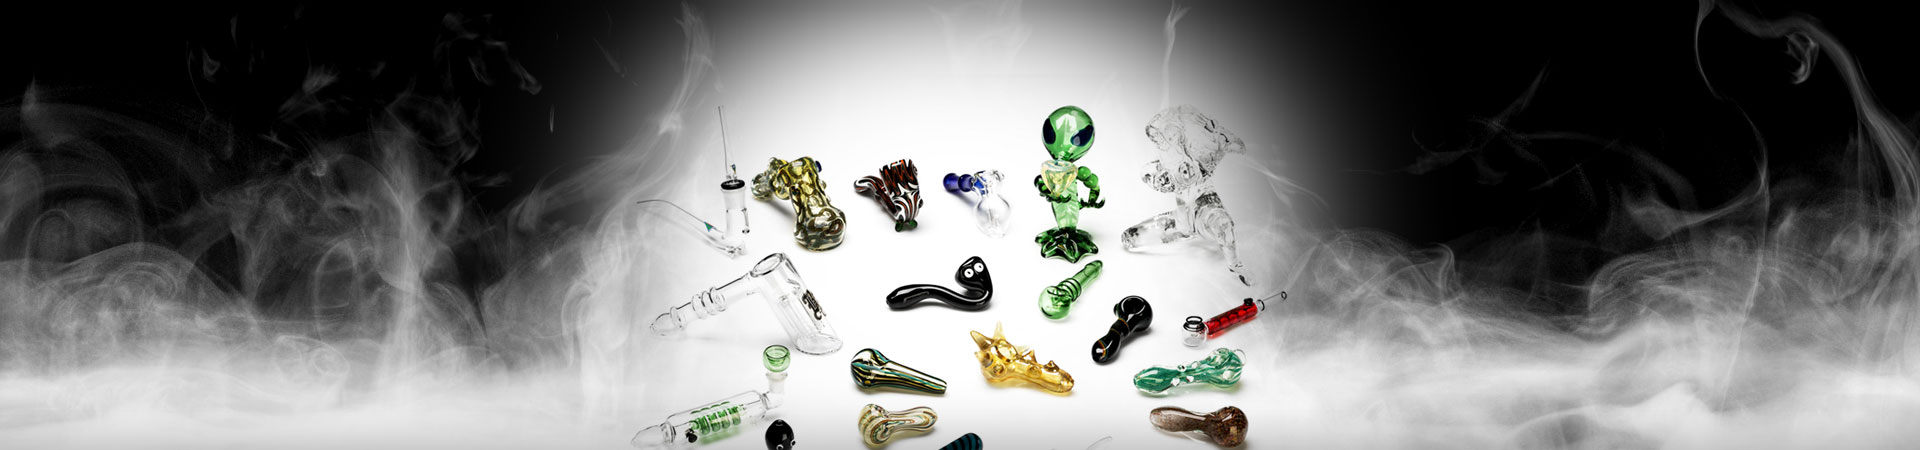 Oil-pipes / dabbing-pipes – vapor instead of smoke works fine